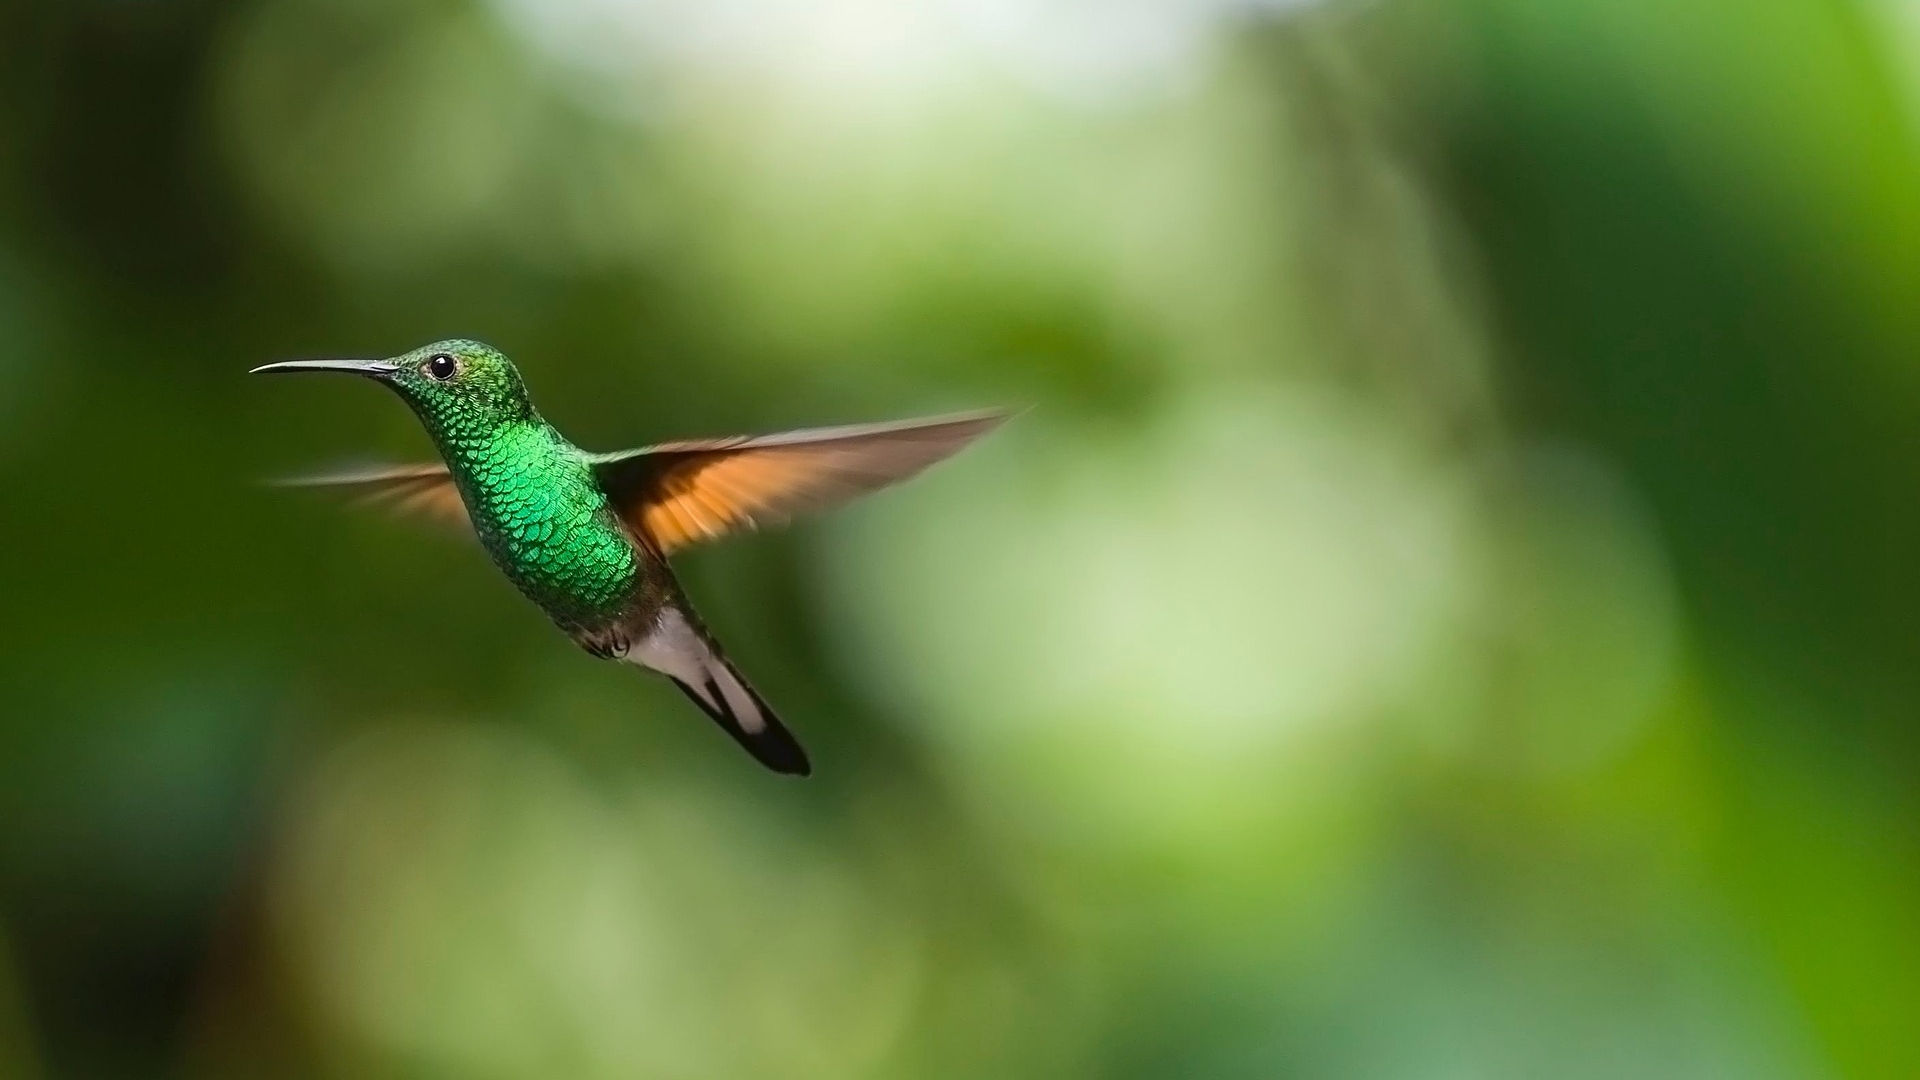 Hummingbirds could be found flitting from flower to flower in the garden. Source: Pixabay